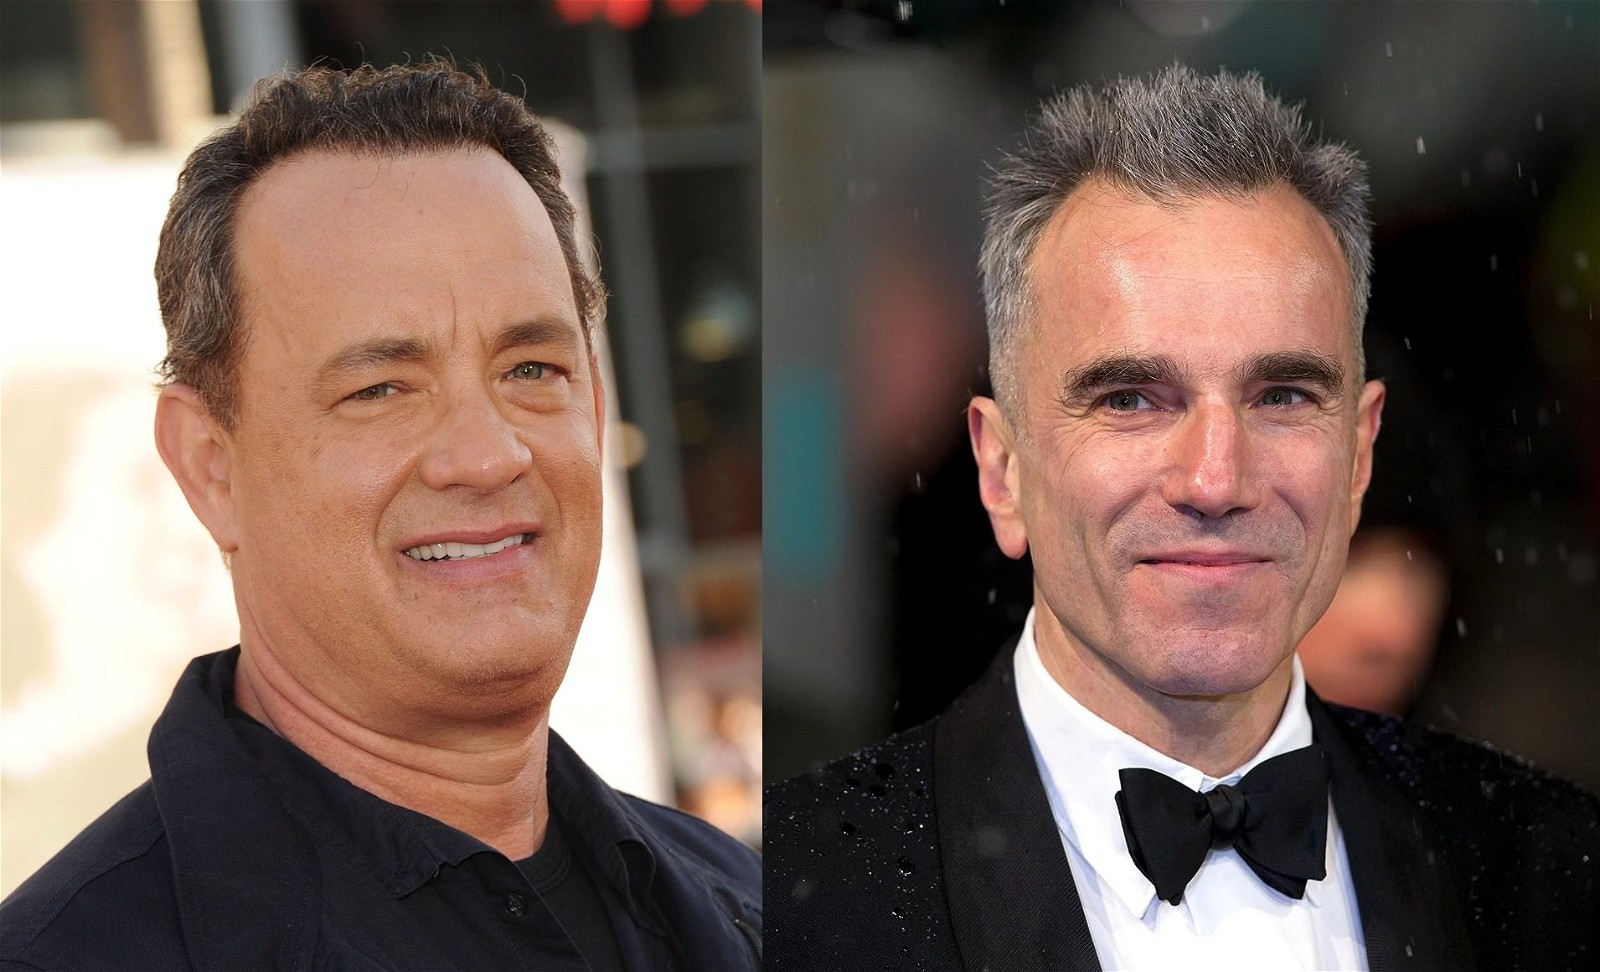 Tom Hanks and Daniel Day-Lewis